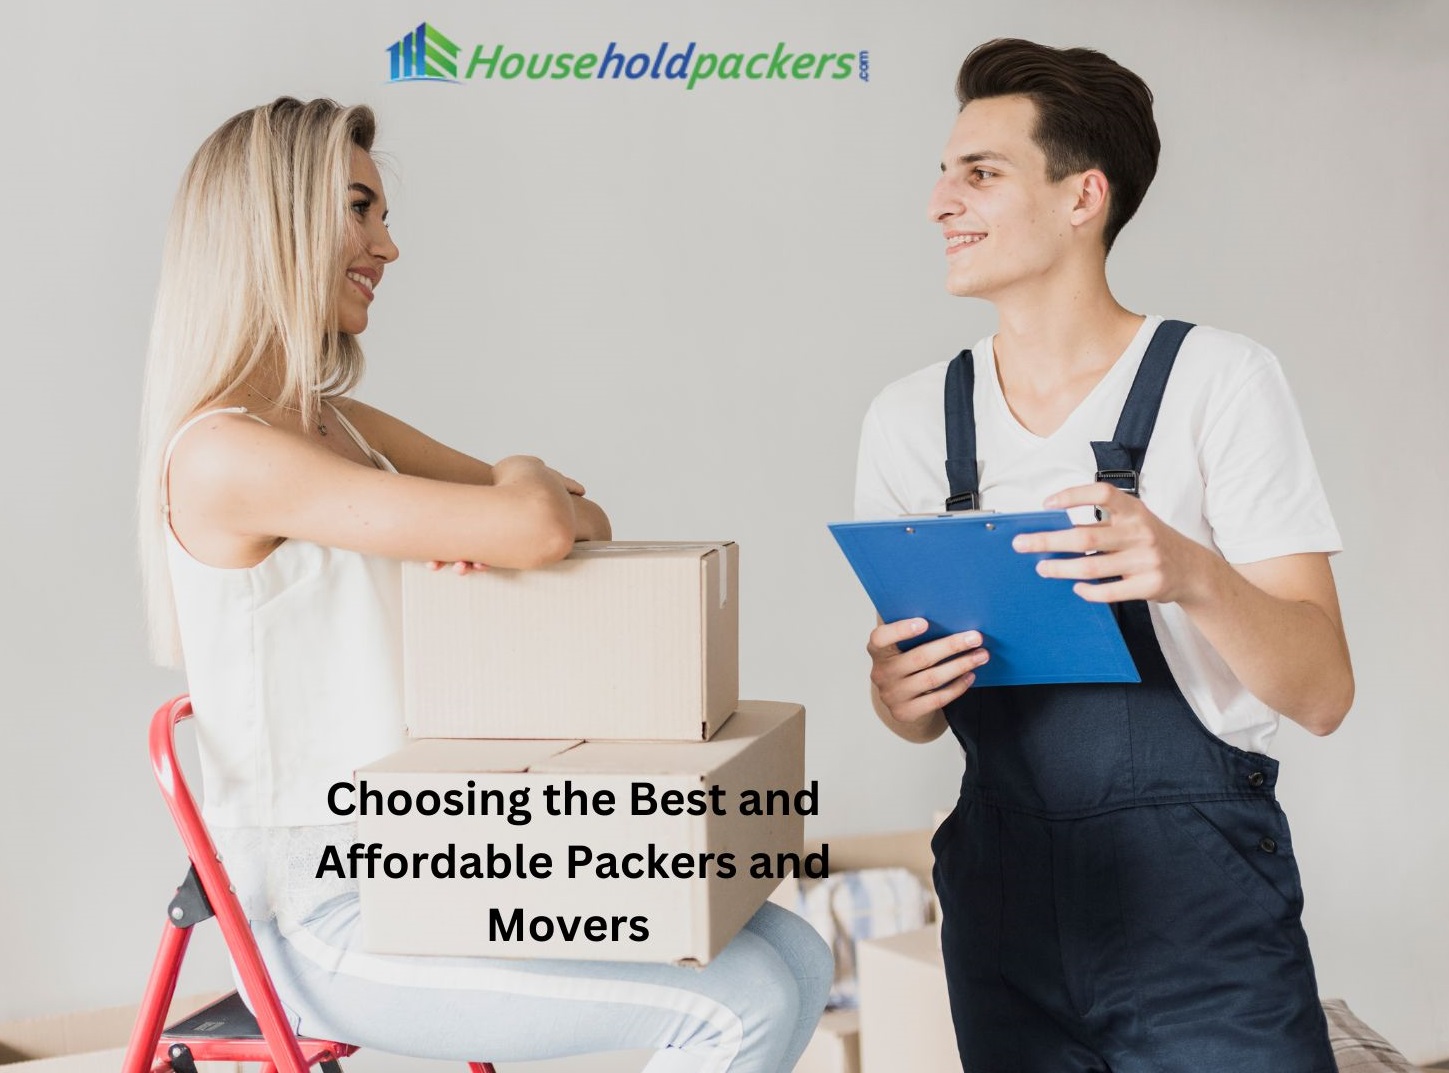 Choosing the Best and Affordable Packers and Movers